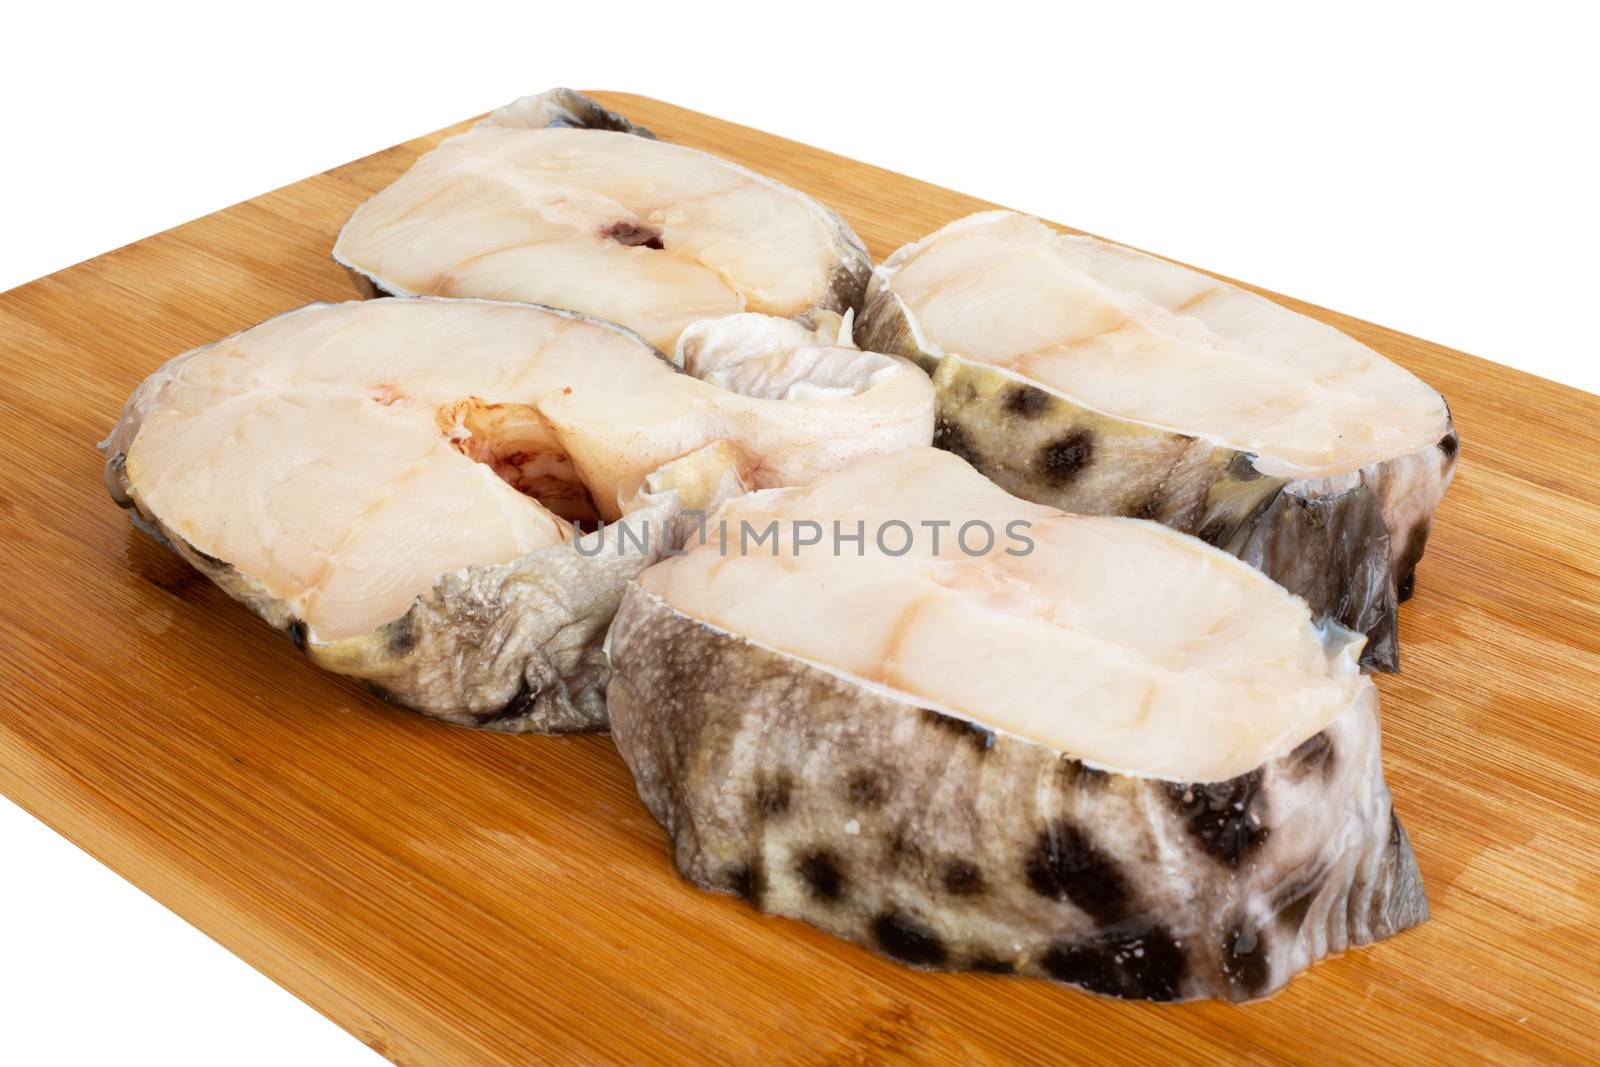 Raw catfish fish steaks on wooden cutting board studio isolated on white background